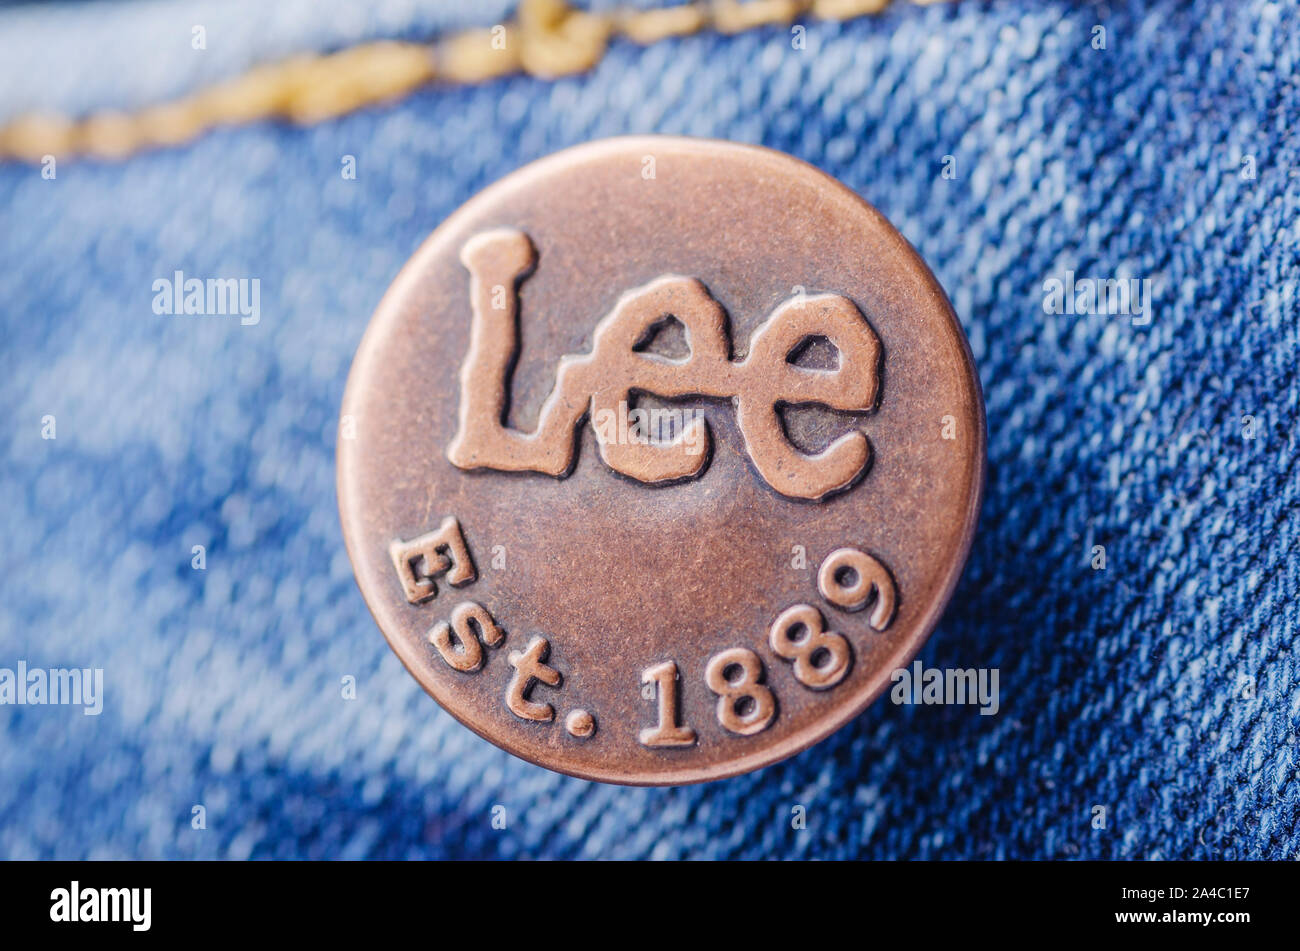 Closeup of Lee button on clothes Stock Photo - Alamy